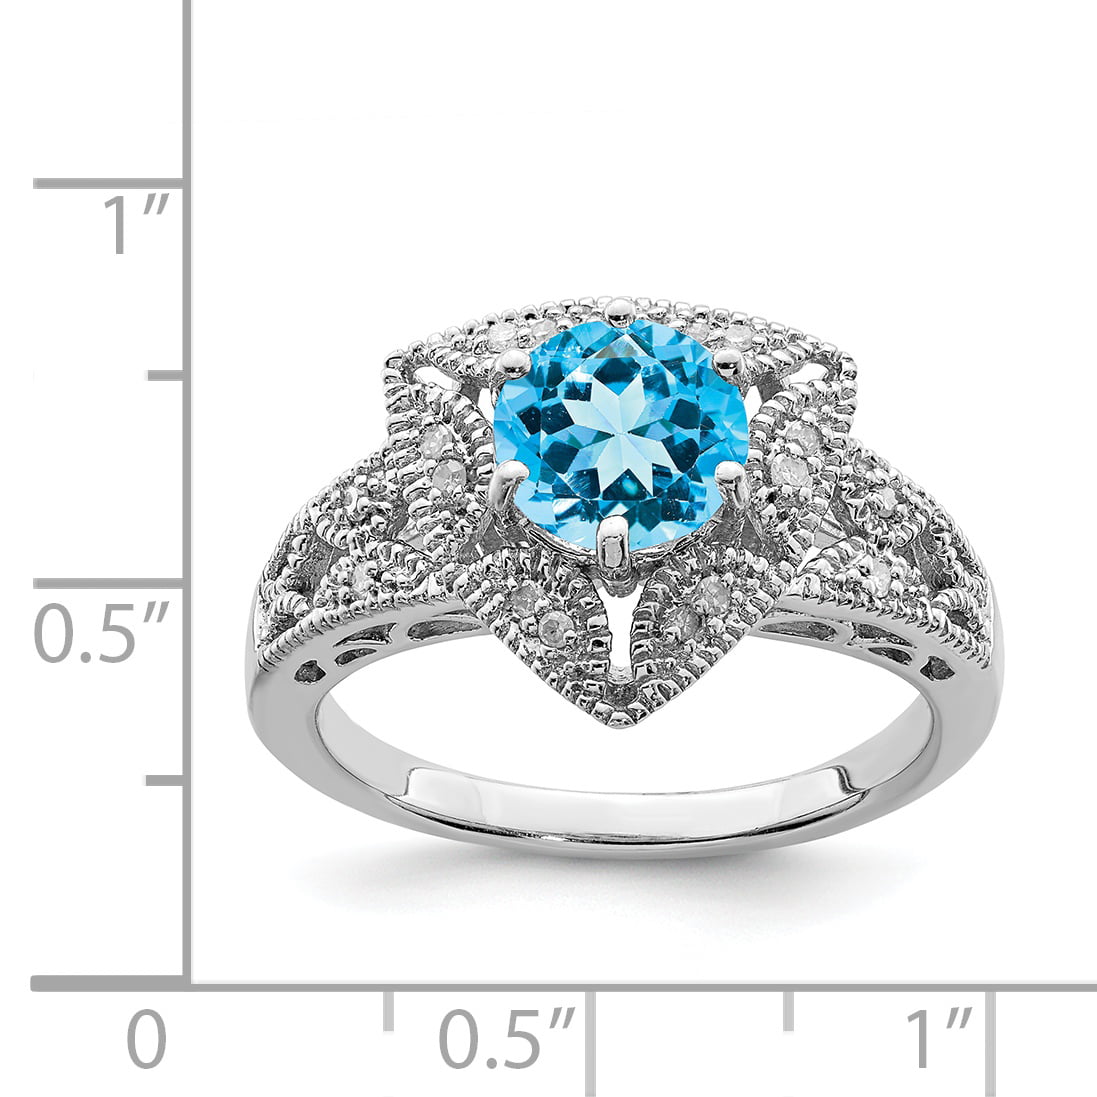 Details about  / Certified Natural Blue Topaz 925 Sterling Silver Ring  Adjustable Women Gift